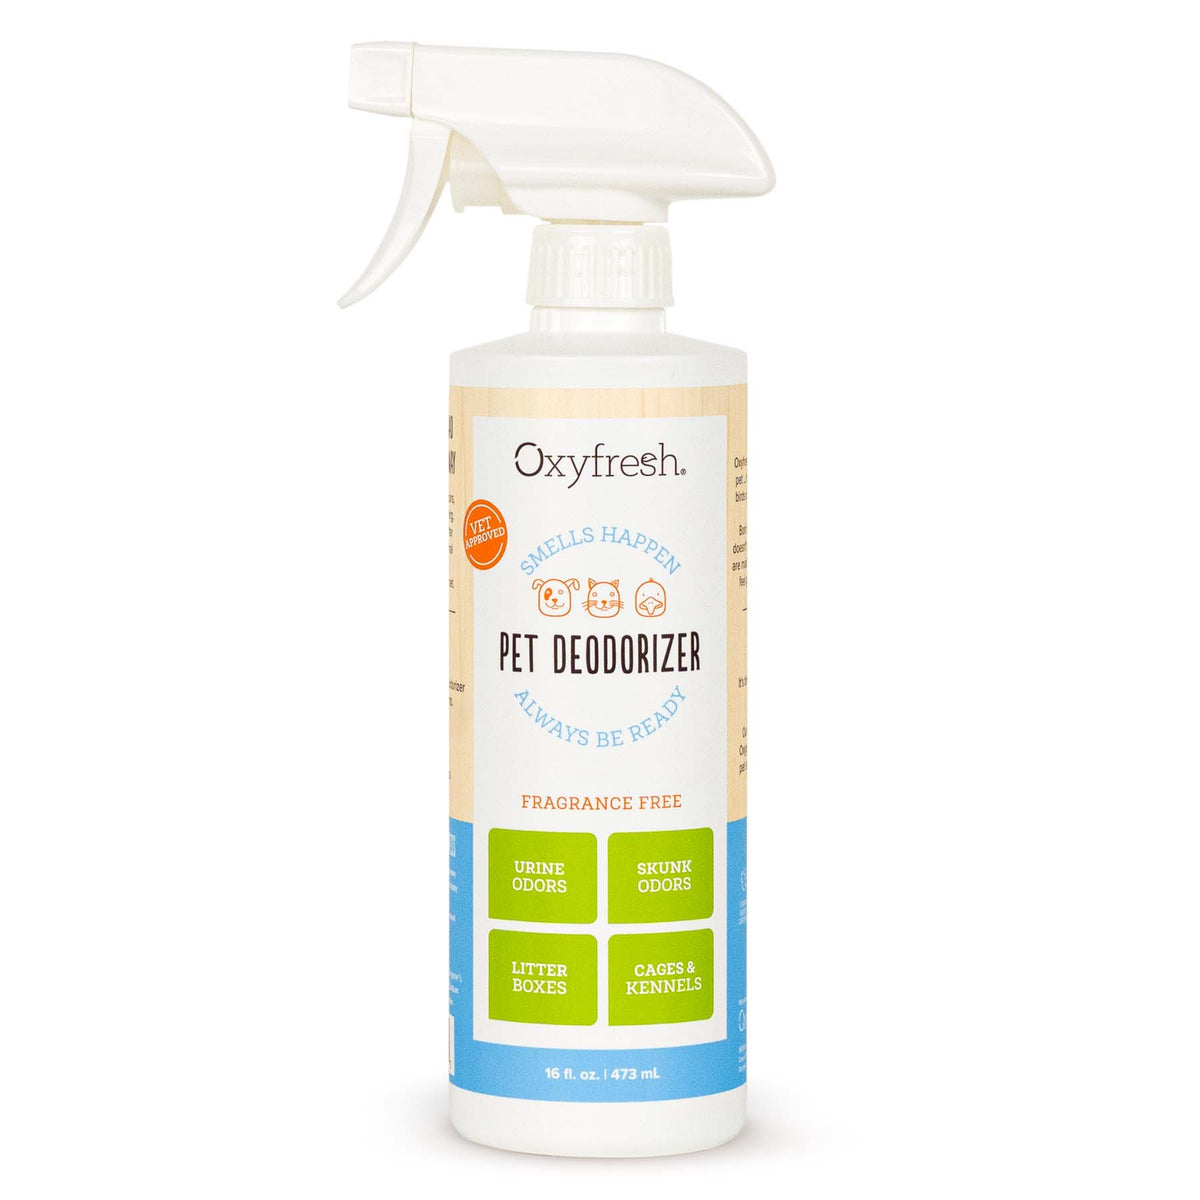 oxyfresh pet deodorizer spray anywhere to deodorize pet smells even on your pet's coat